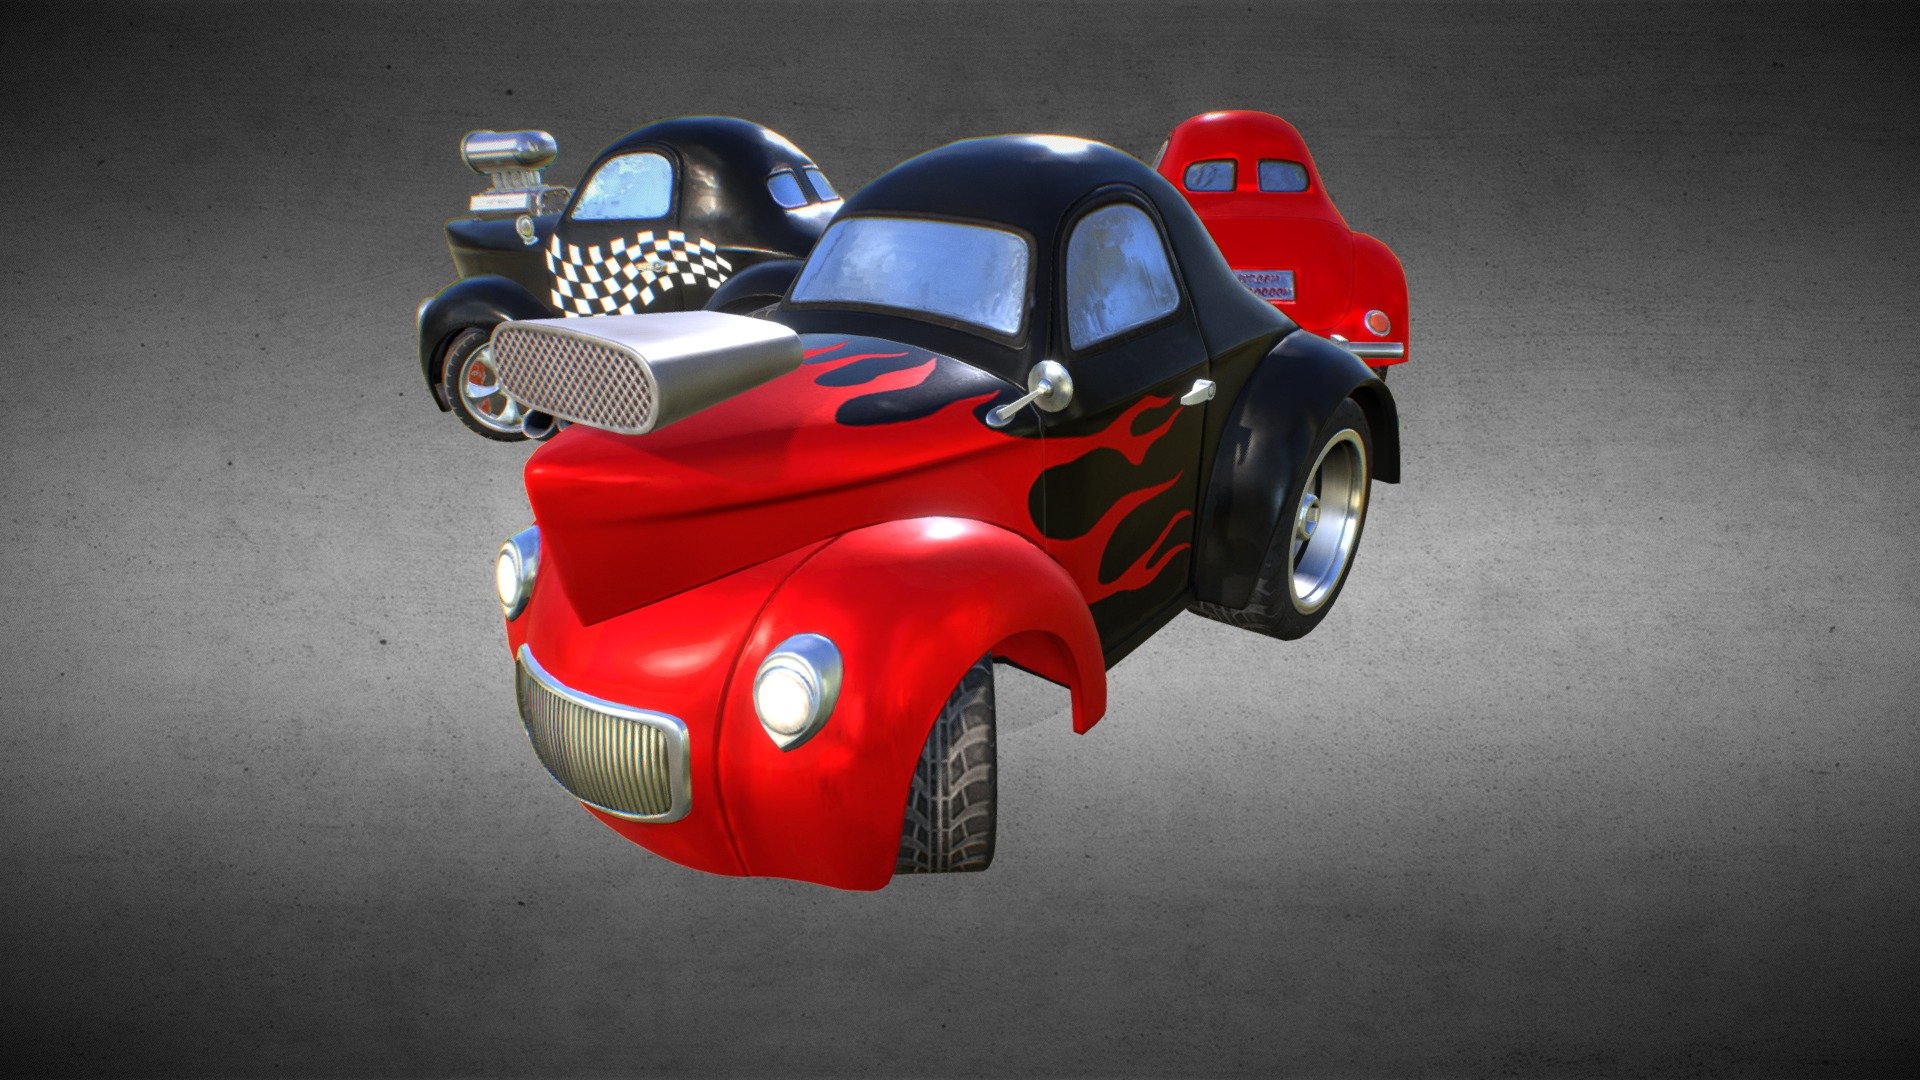 Low poly cartoon-stylized cars inspired by the car design of 1940s.

Models summary:

MK1: 9014 tris, 4727 verts

MK2: 9610 tris, 5075 verts

MK3: 14412 tris, 7648 verts

 - Cartoon Hot Rod Coupe - 3D model by RicochetWitcher 3d model